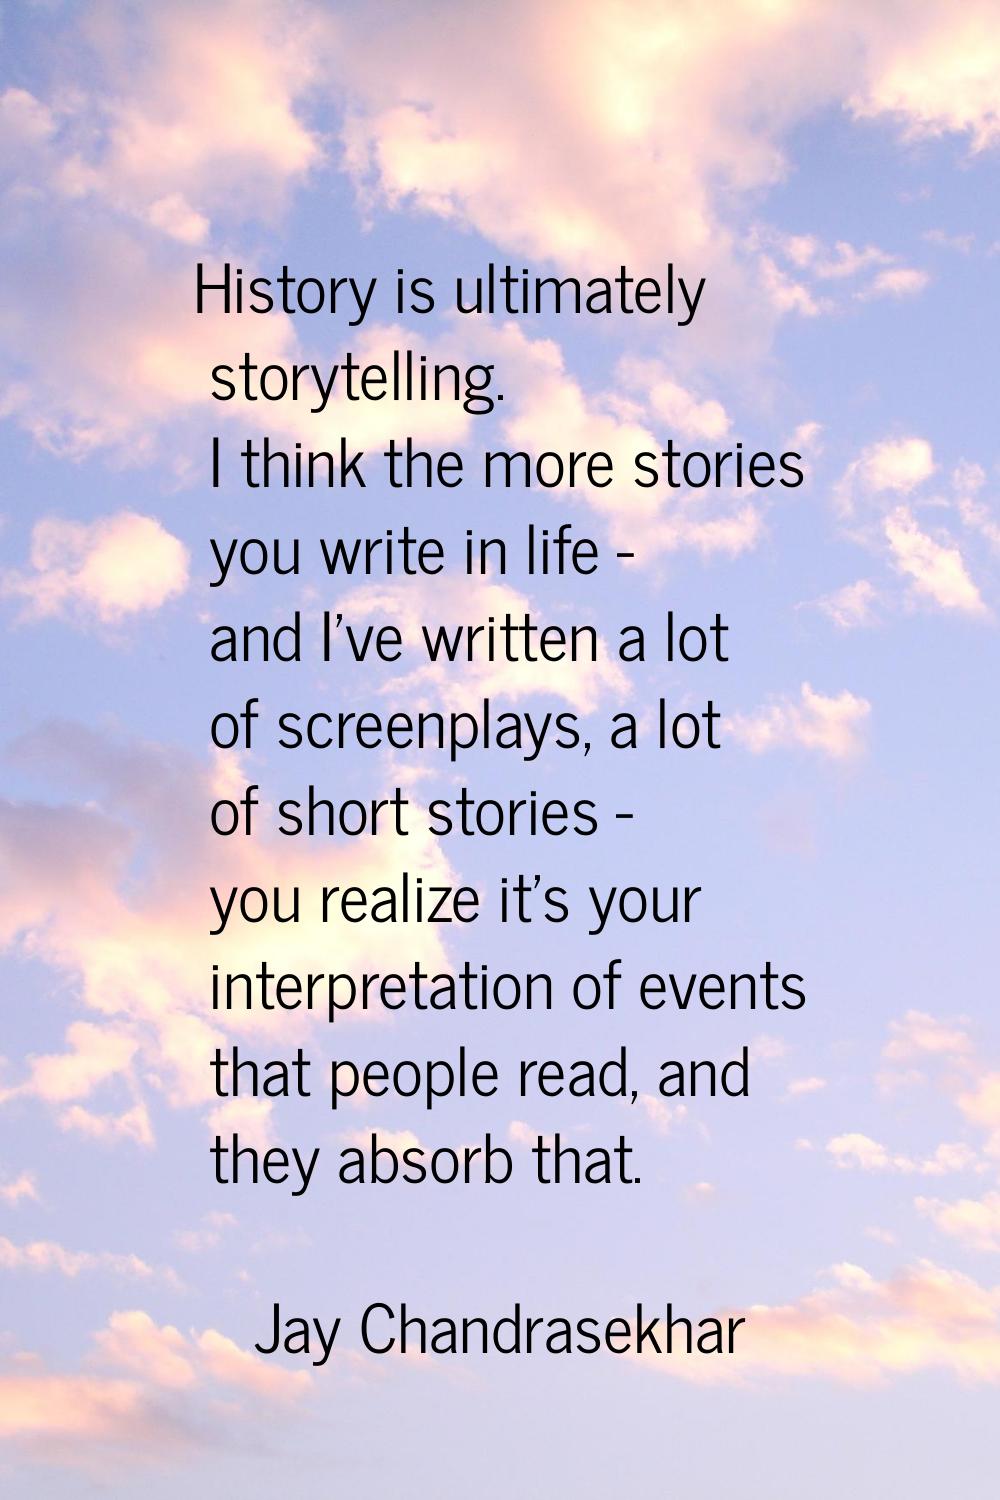 History is ultimately storytelling. I think the more stories you write in life - and I've written a